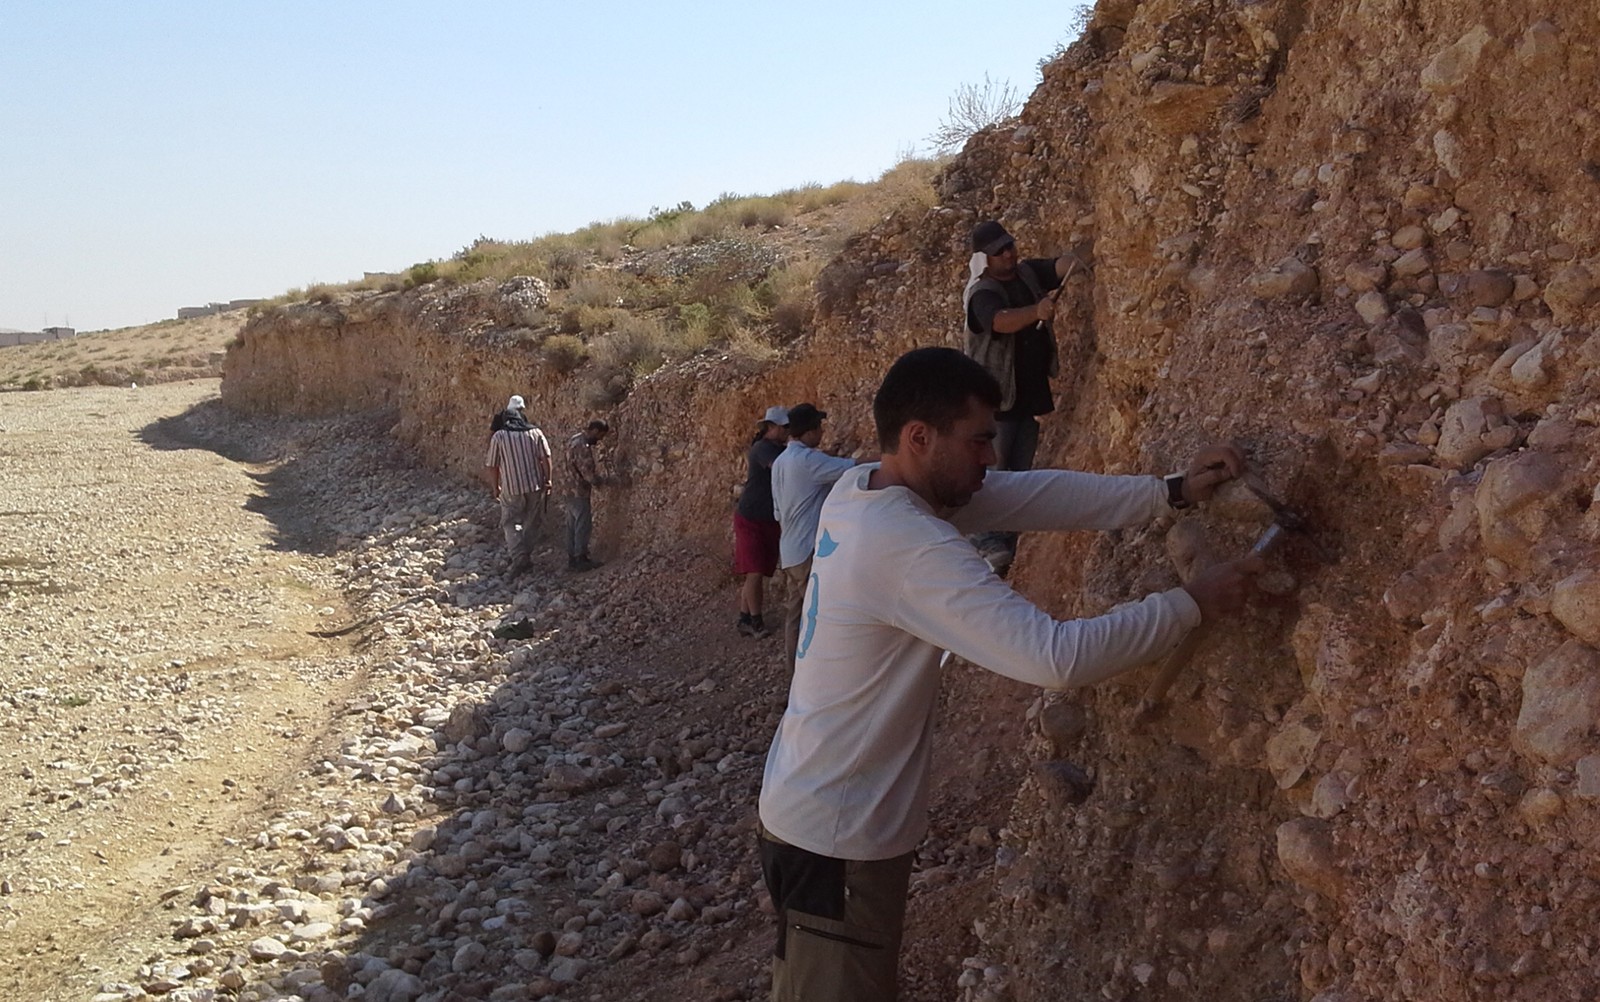 The excavations were conducted between 2013 and 2015 in Jordan.